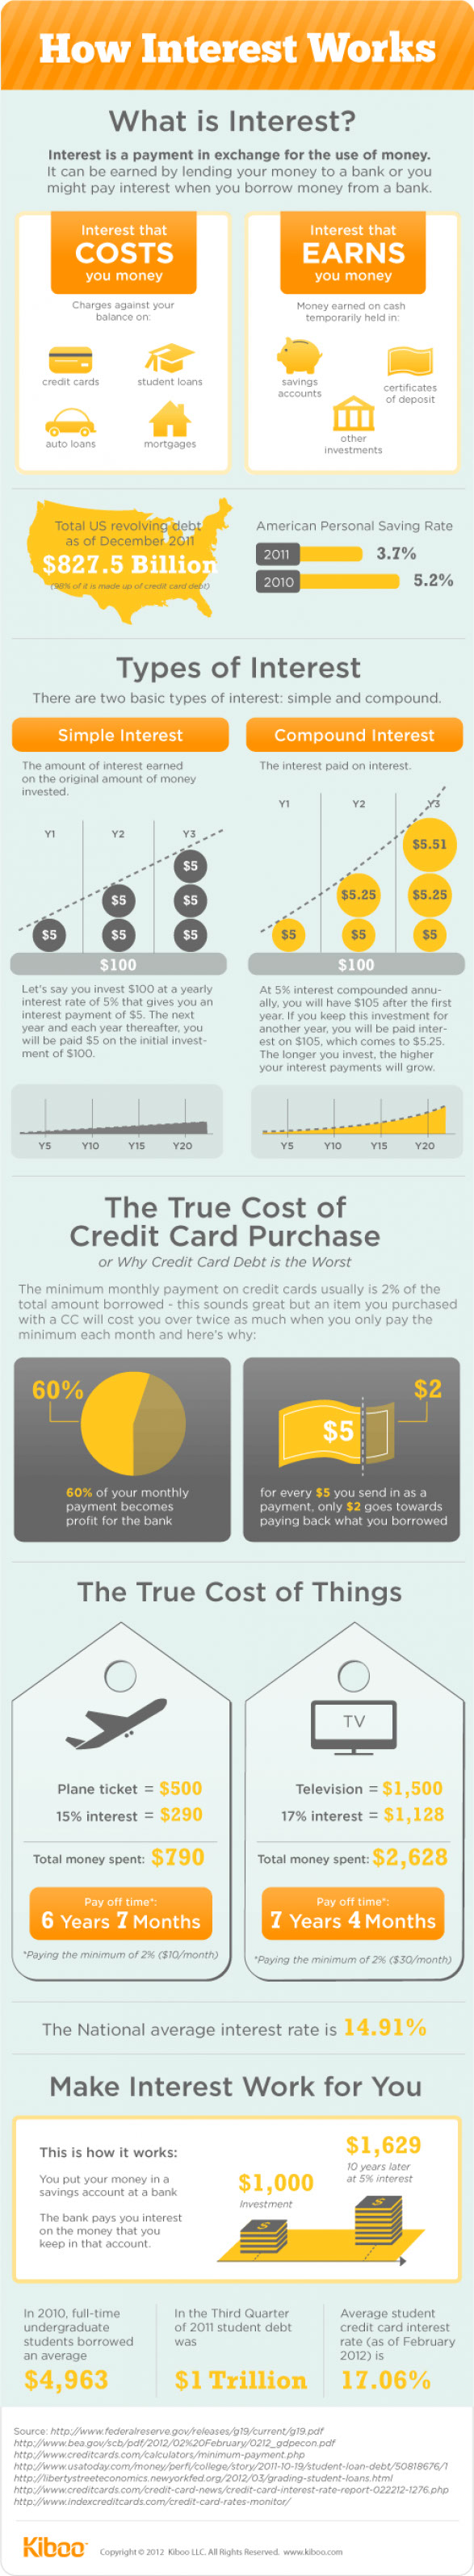 How-Interest-Rates-Work-infographic